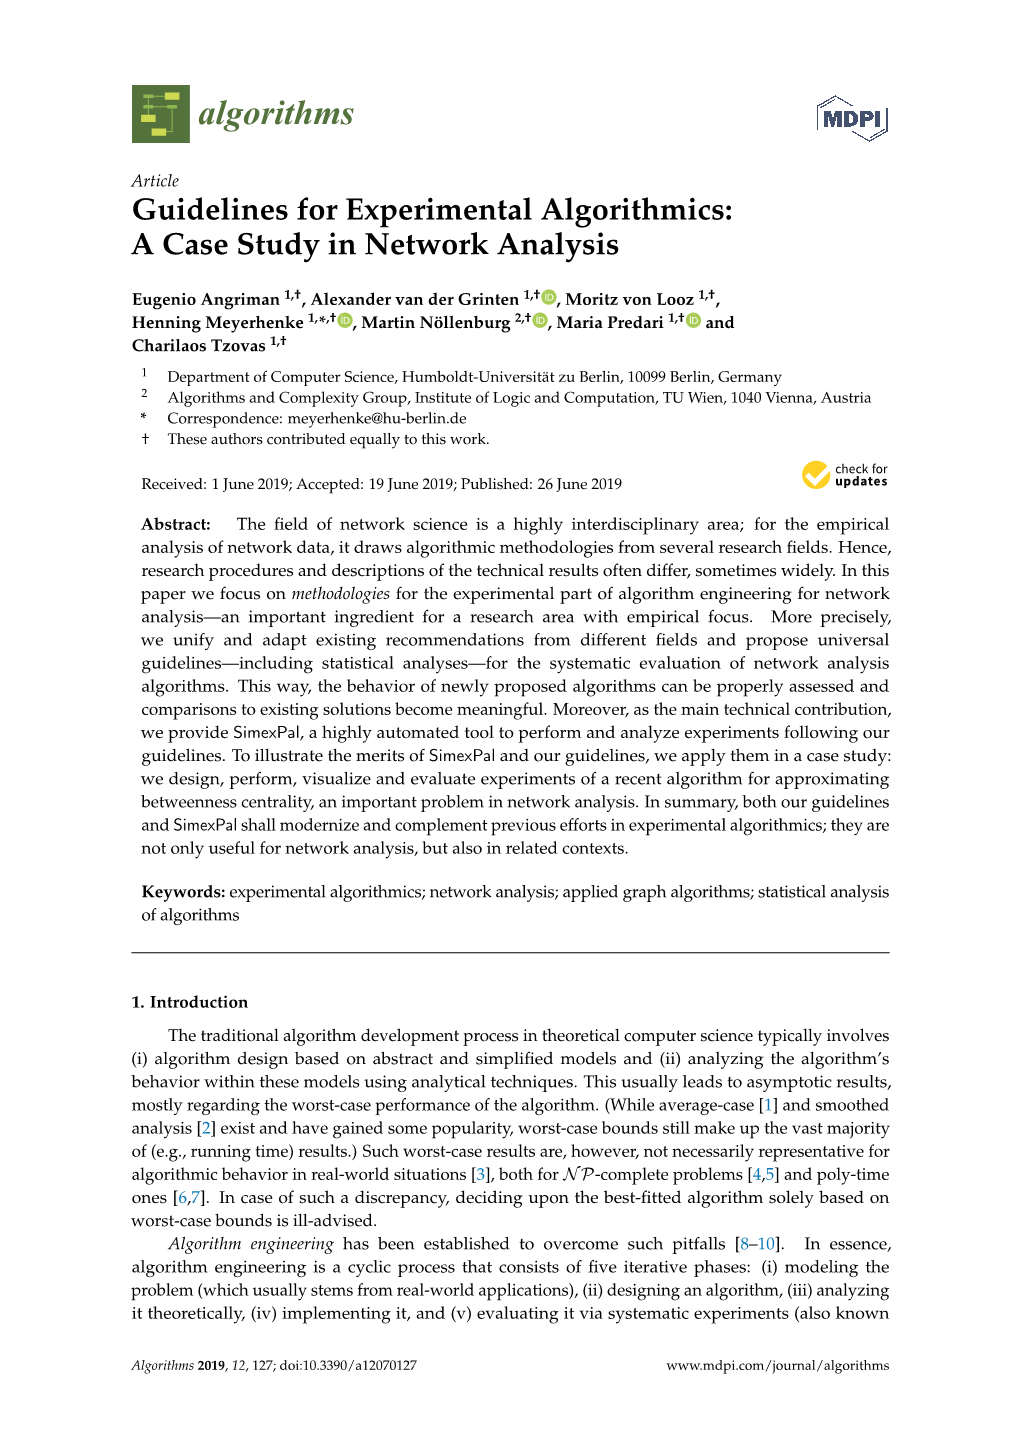 A Case Study in Network Analysis